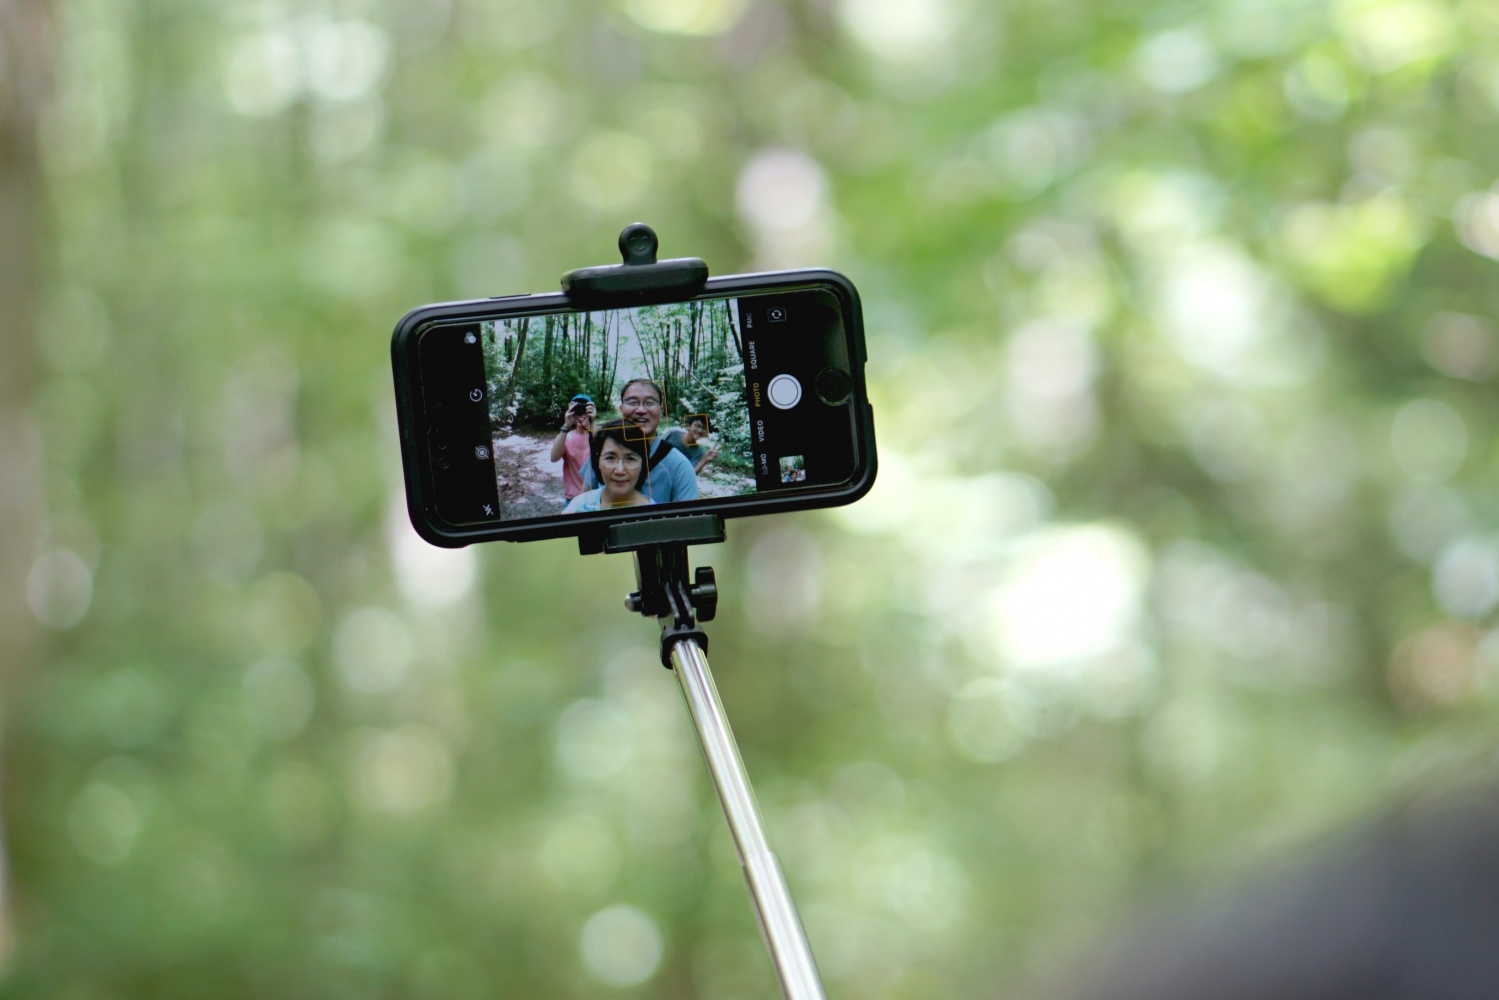 Why Vloggers Prefer Selfie Stick Over Tripods; Amazon Top Tripods and Selfie Sticks